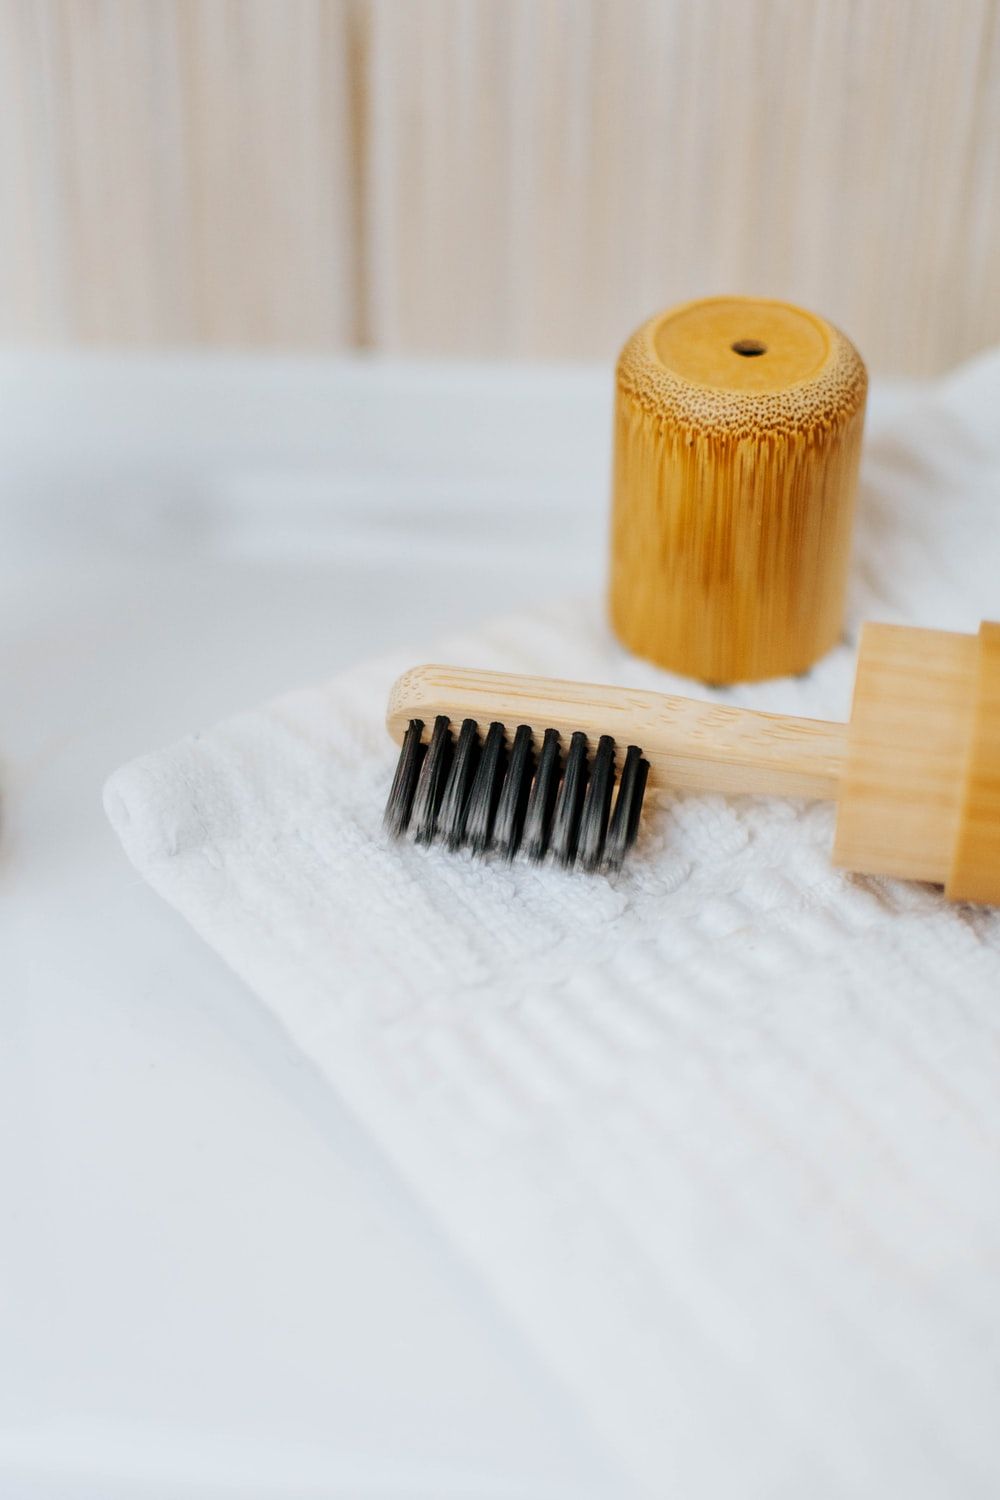 Bamboo Toothbrush Picture. Download Free Image